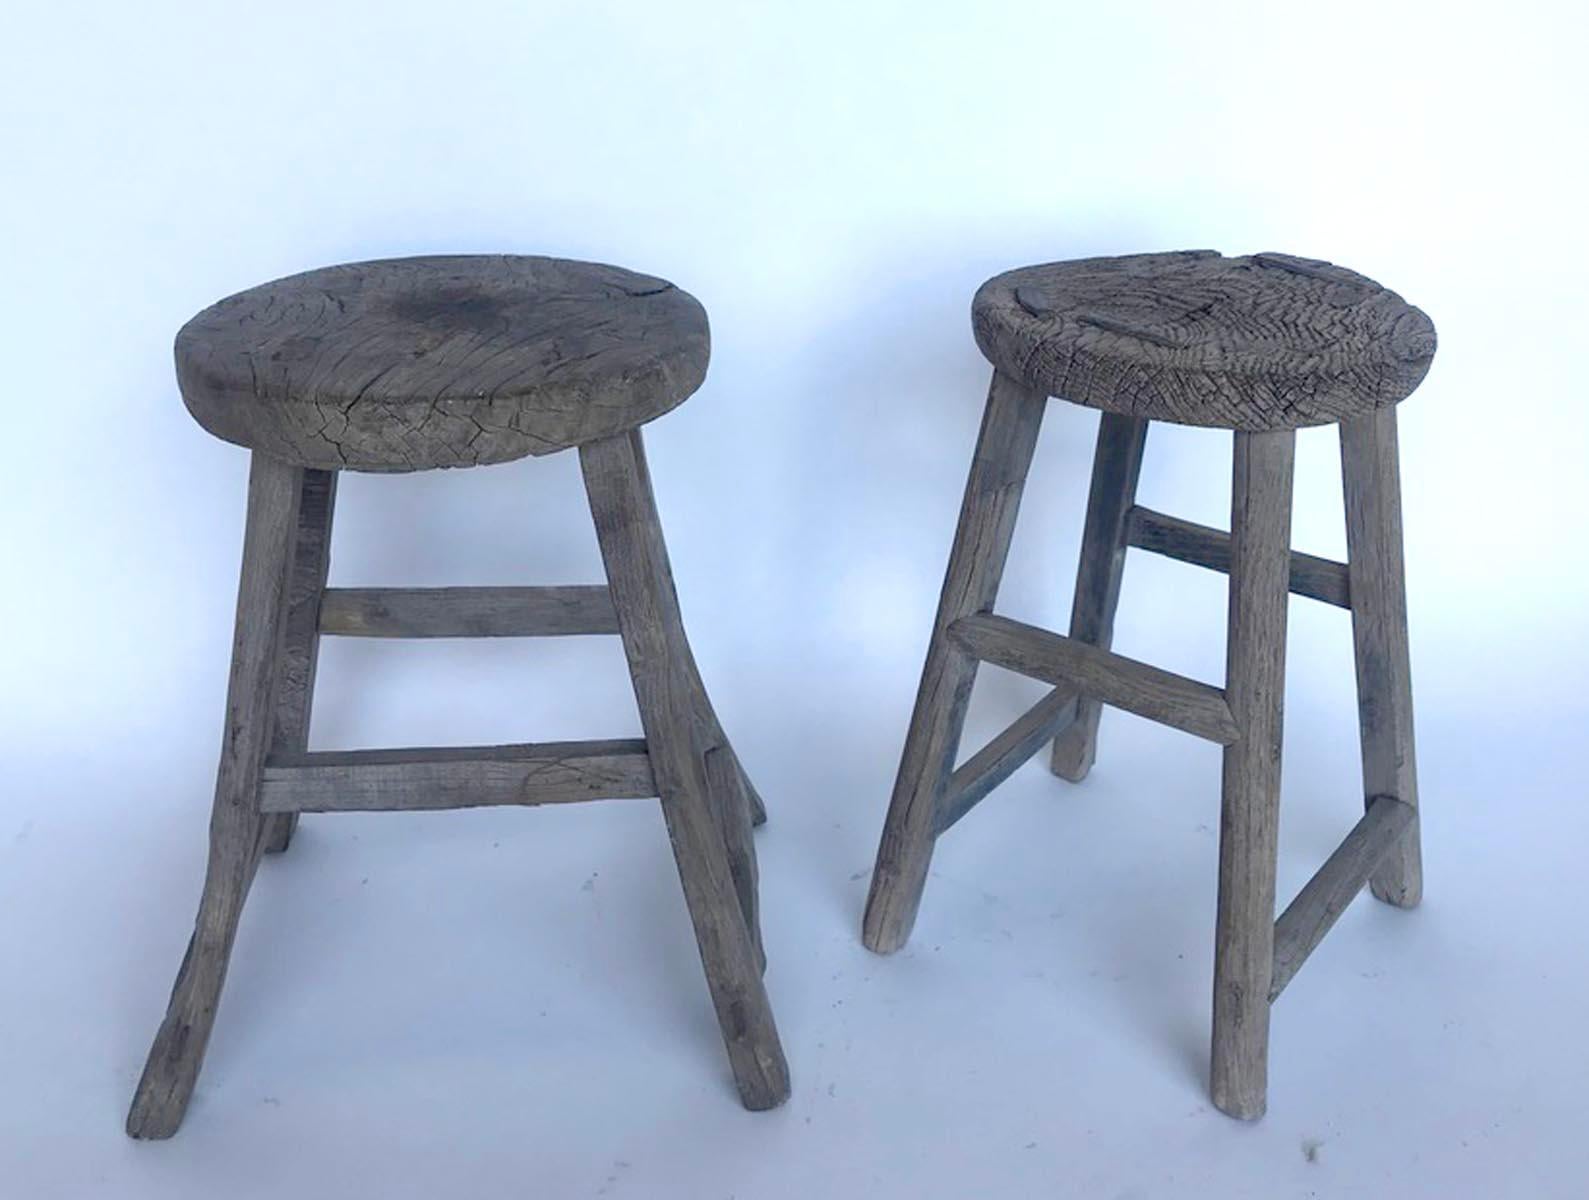 19th c. Chinese elm stools with various base configurations. Smooth, weathered, worn grey patina. Mortise and tenon joinery. Great for extra seating, a small side table or as a plant stand.
Sold separately, $785 each. Please refer to left or right